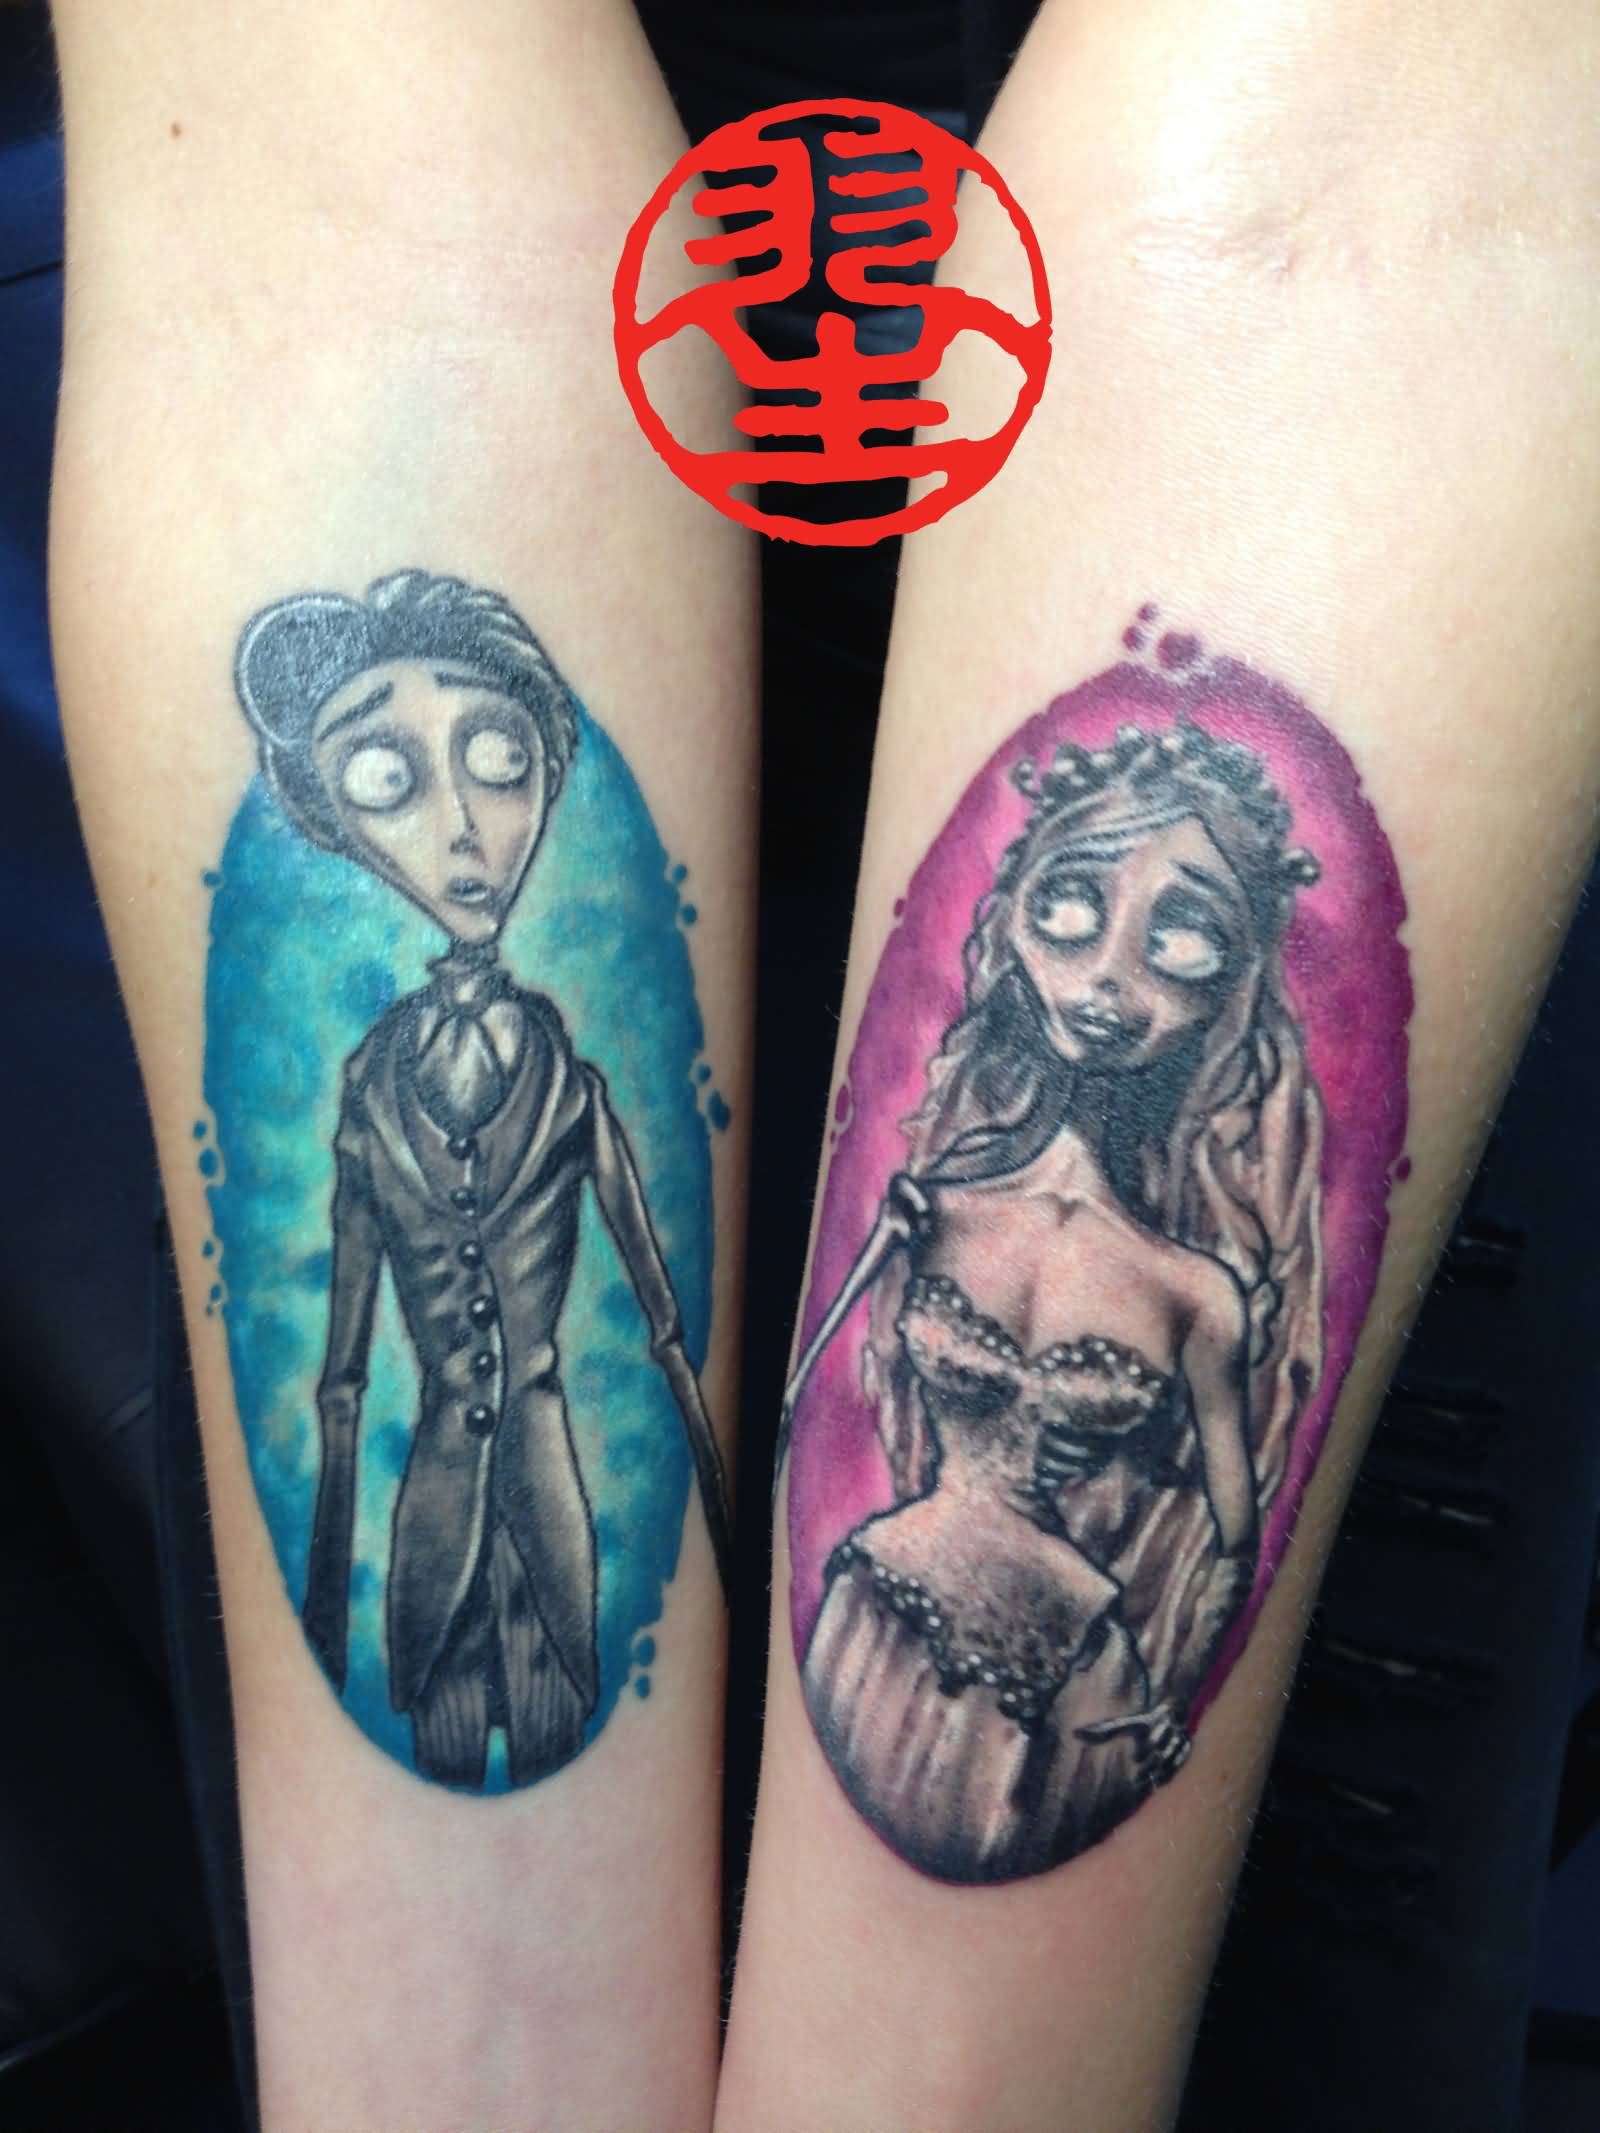 Corpse Bride Tattoos On Both Forearms